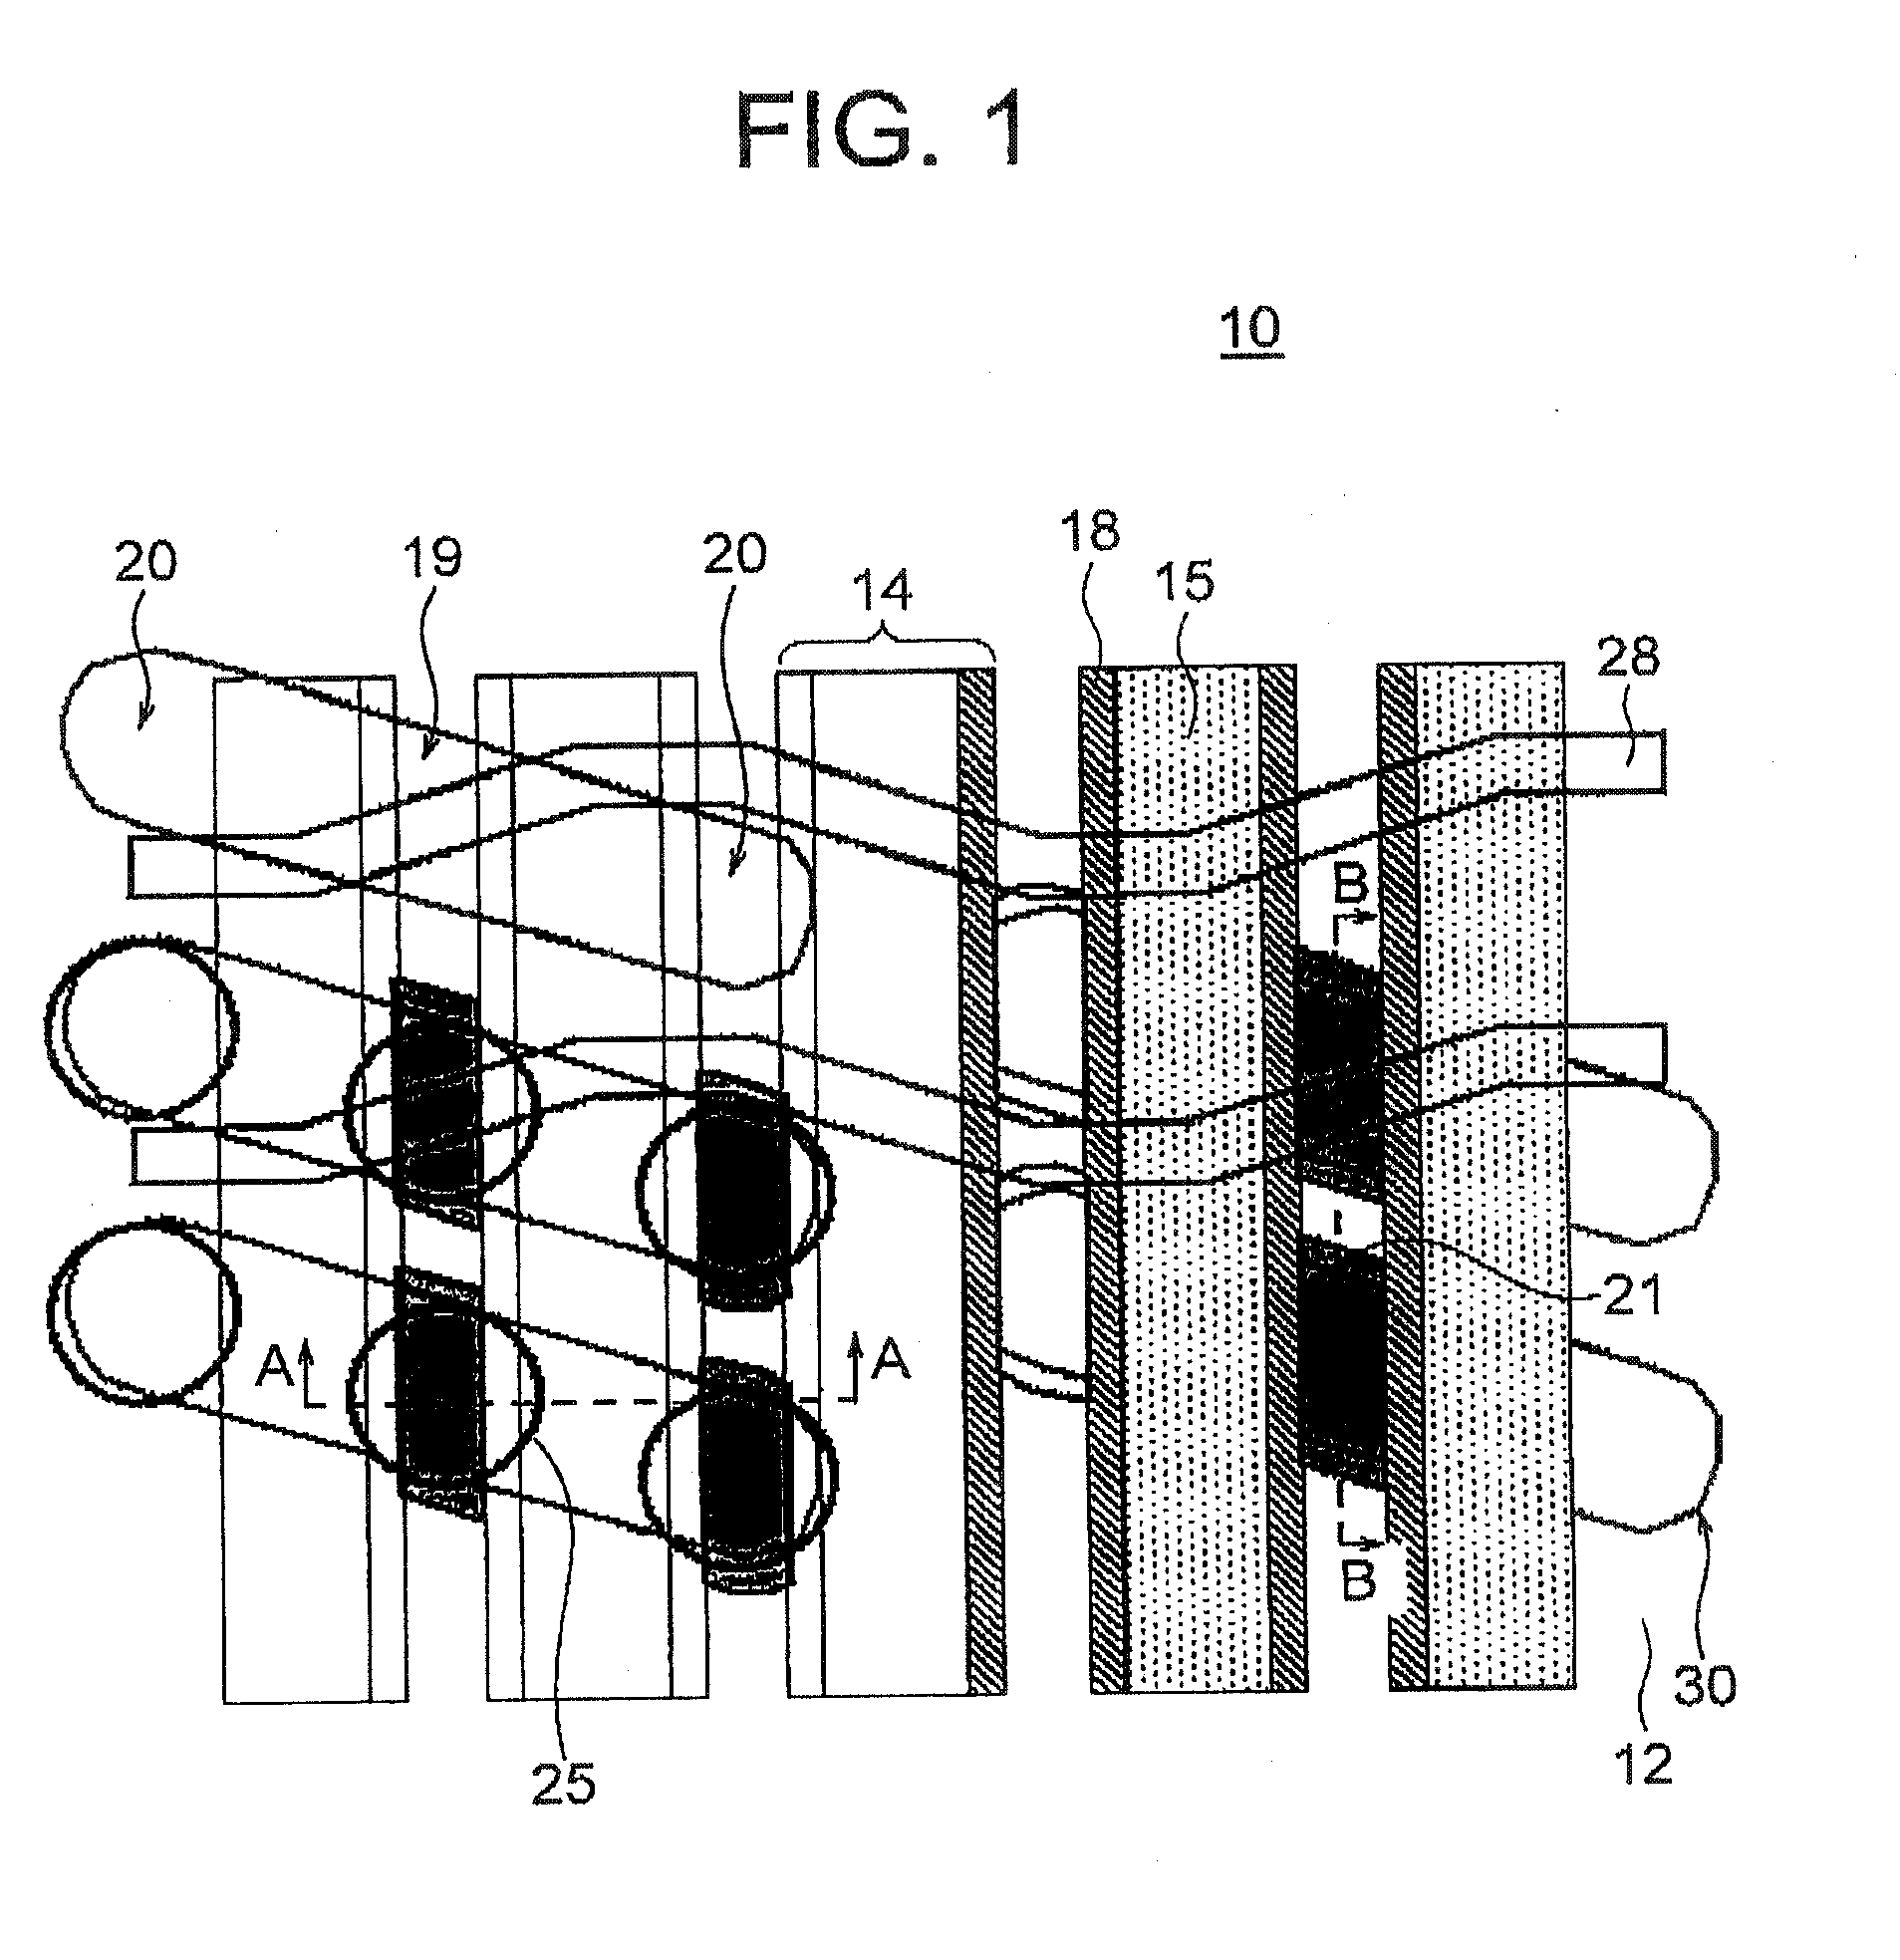 Semiconductor device having an epitaxial-grown contact plug